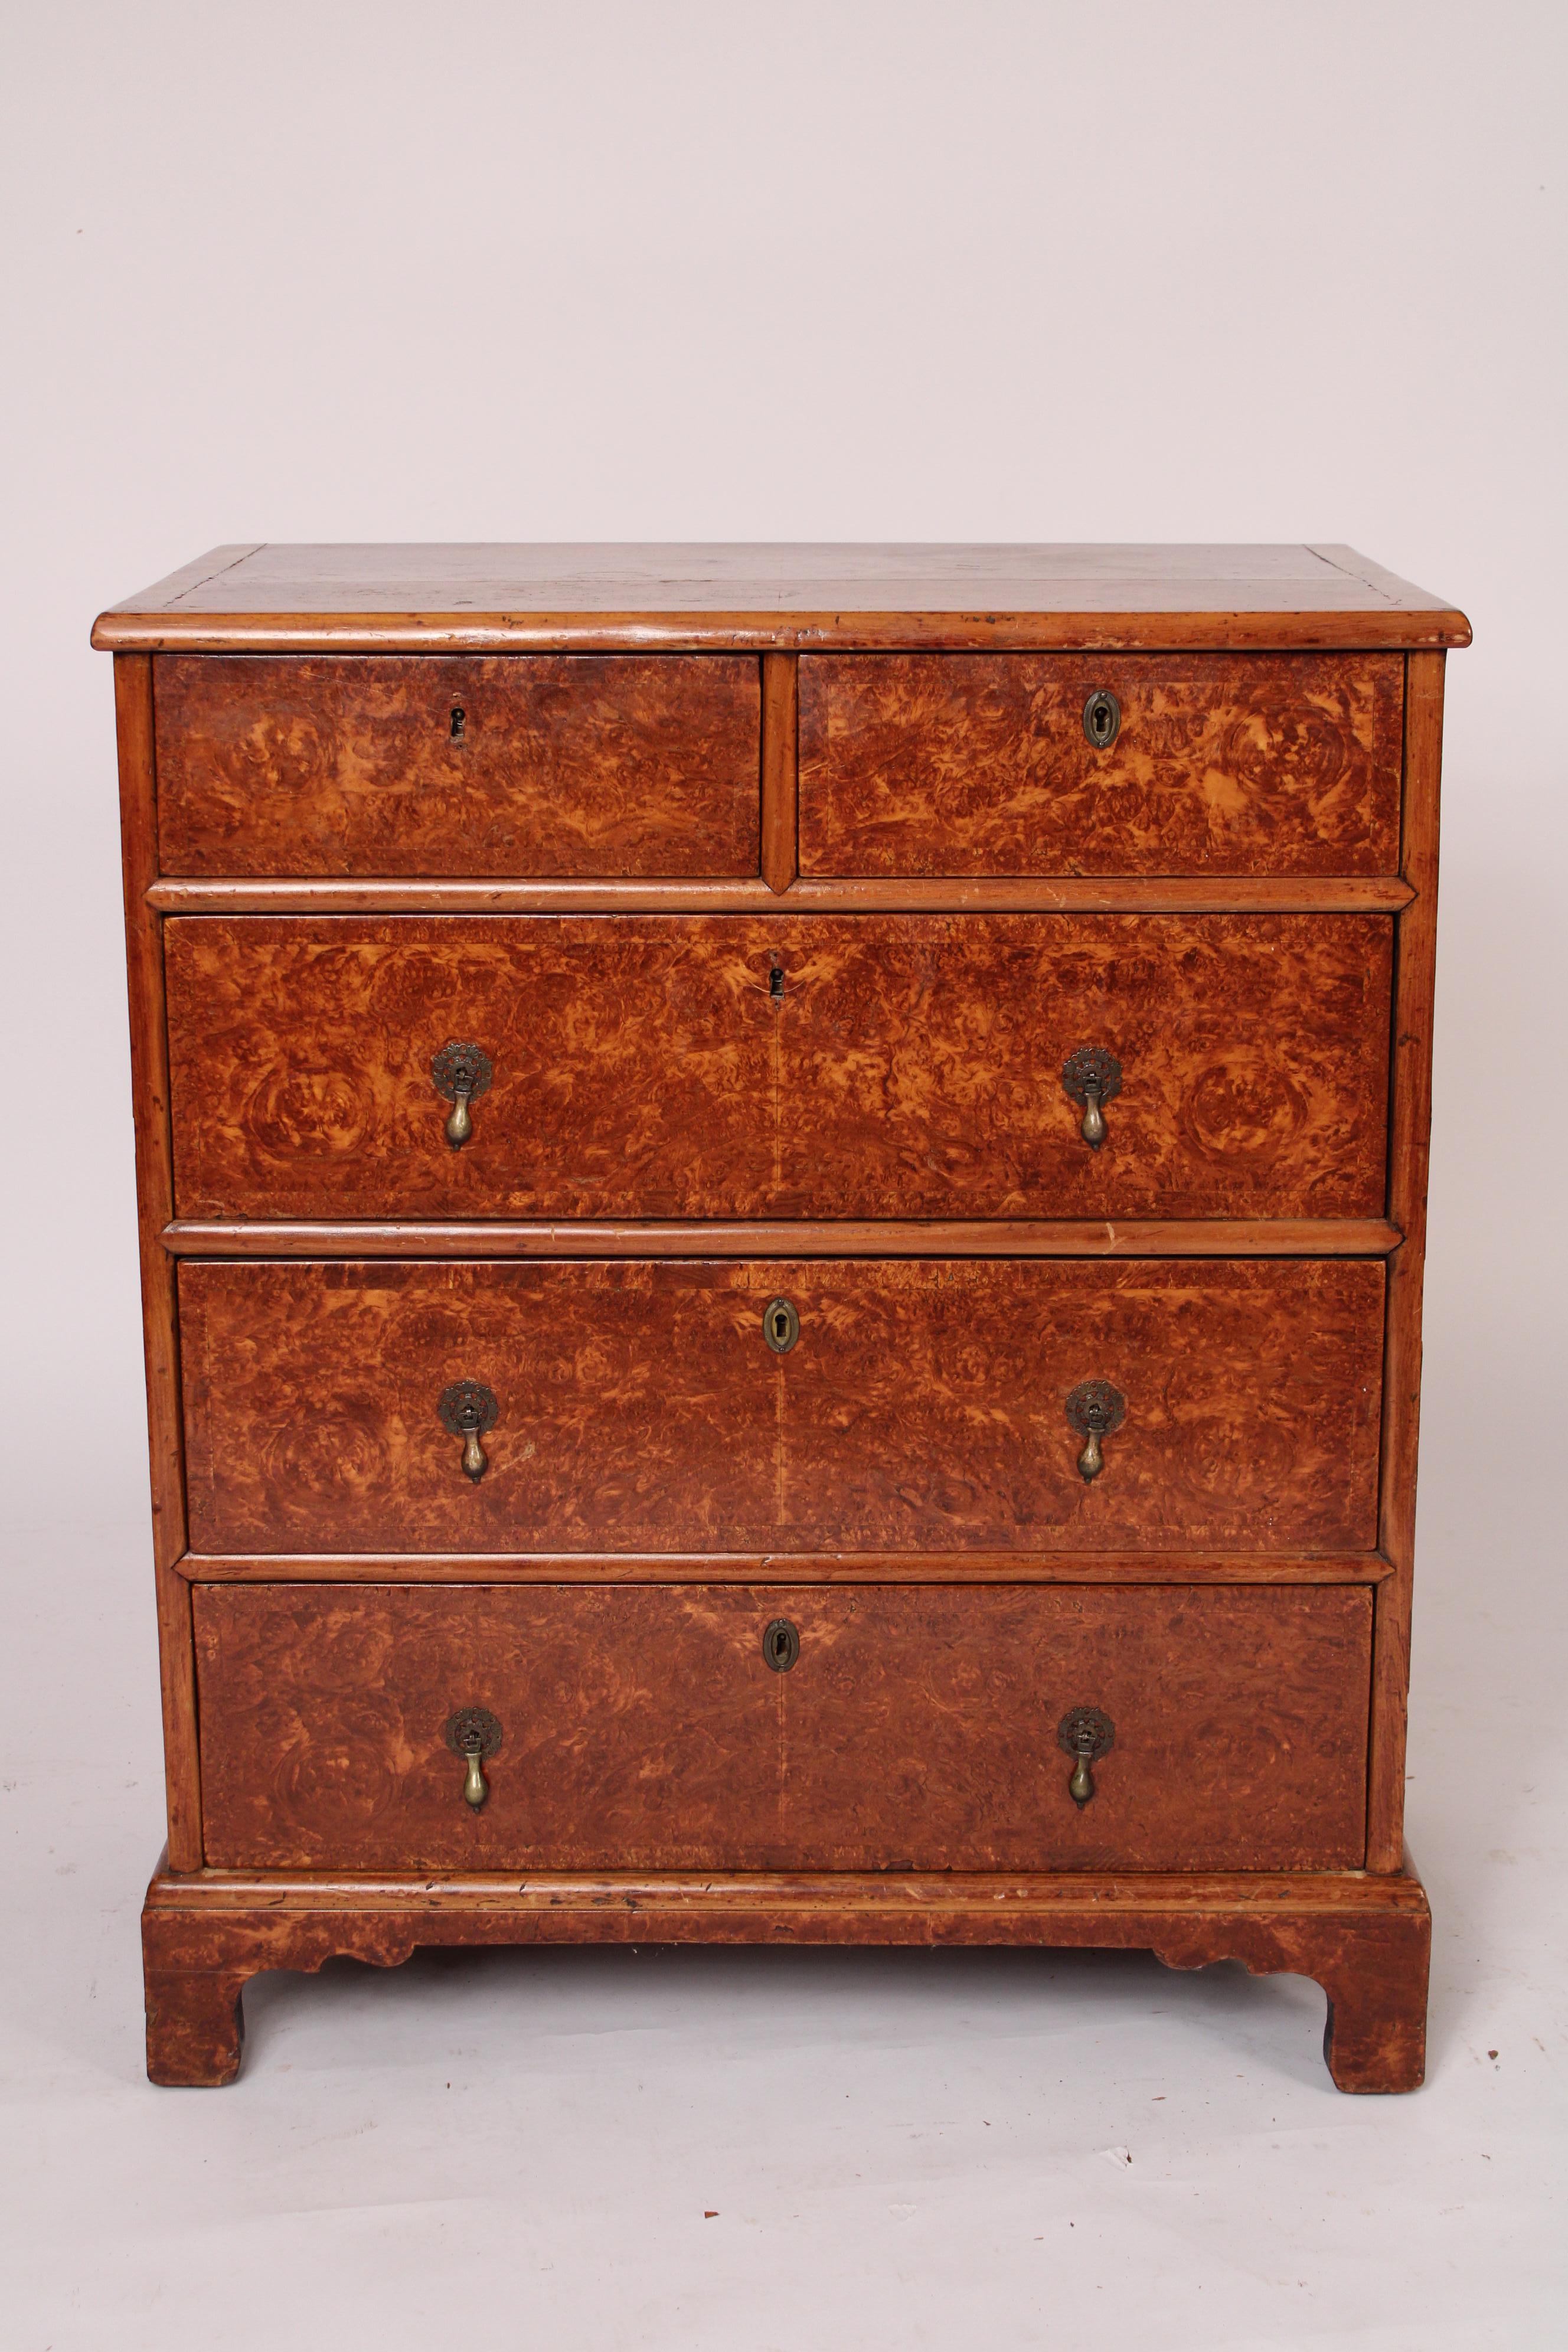 George I style burled wood chest of drawers, circa 1910. With a slightly rectangular top with molded front and side edges, two top drawers over 3 lower drawers all with brass tear drop pulls, a molded base resting on bracket feet. The burled wood is